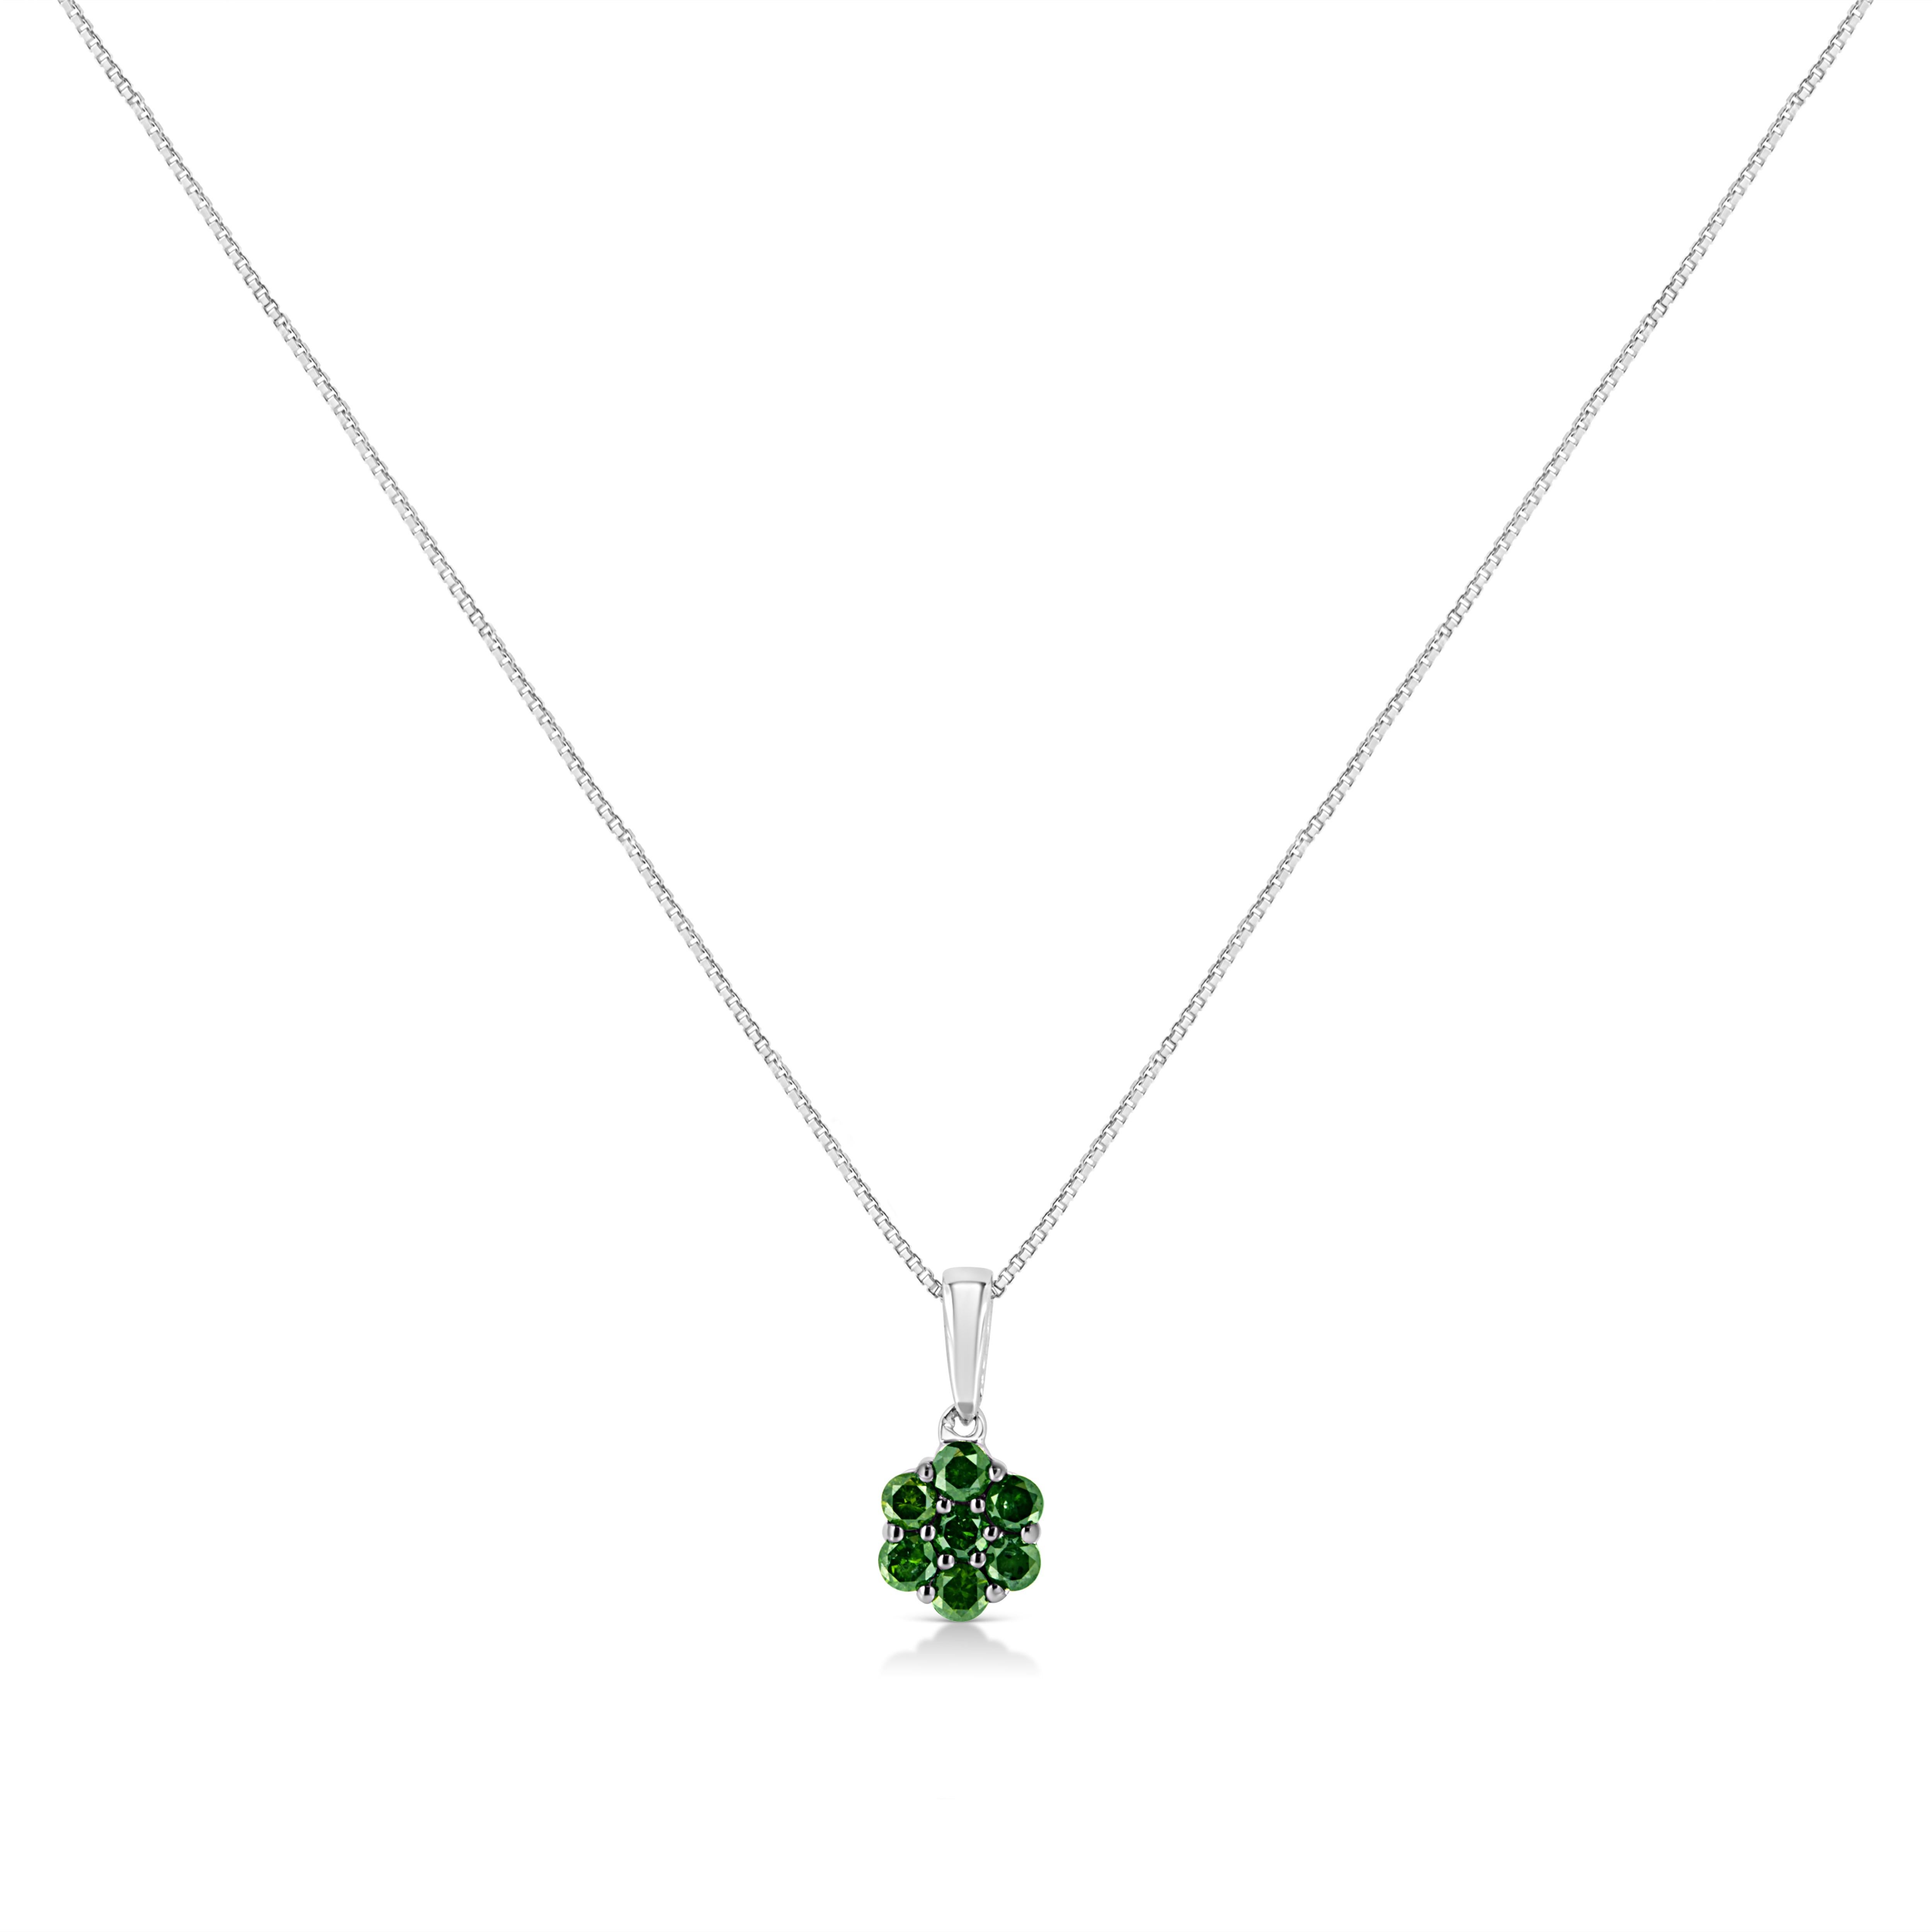 This gorgeous floral diamond cluster pendant will shine on your neck. Fashioned in the finest .925 sterling silver, this necklace gleams with 7 treated green diamonds in an elegant setting. The diamonds are round-cut and prong set with a total carat